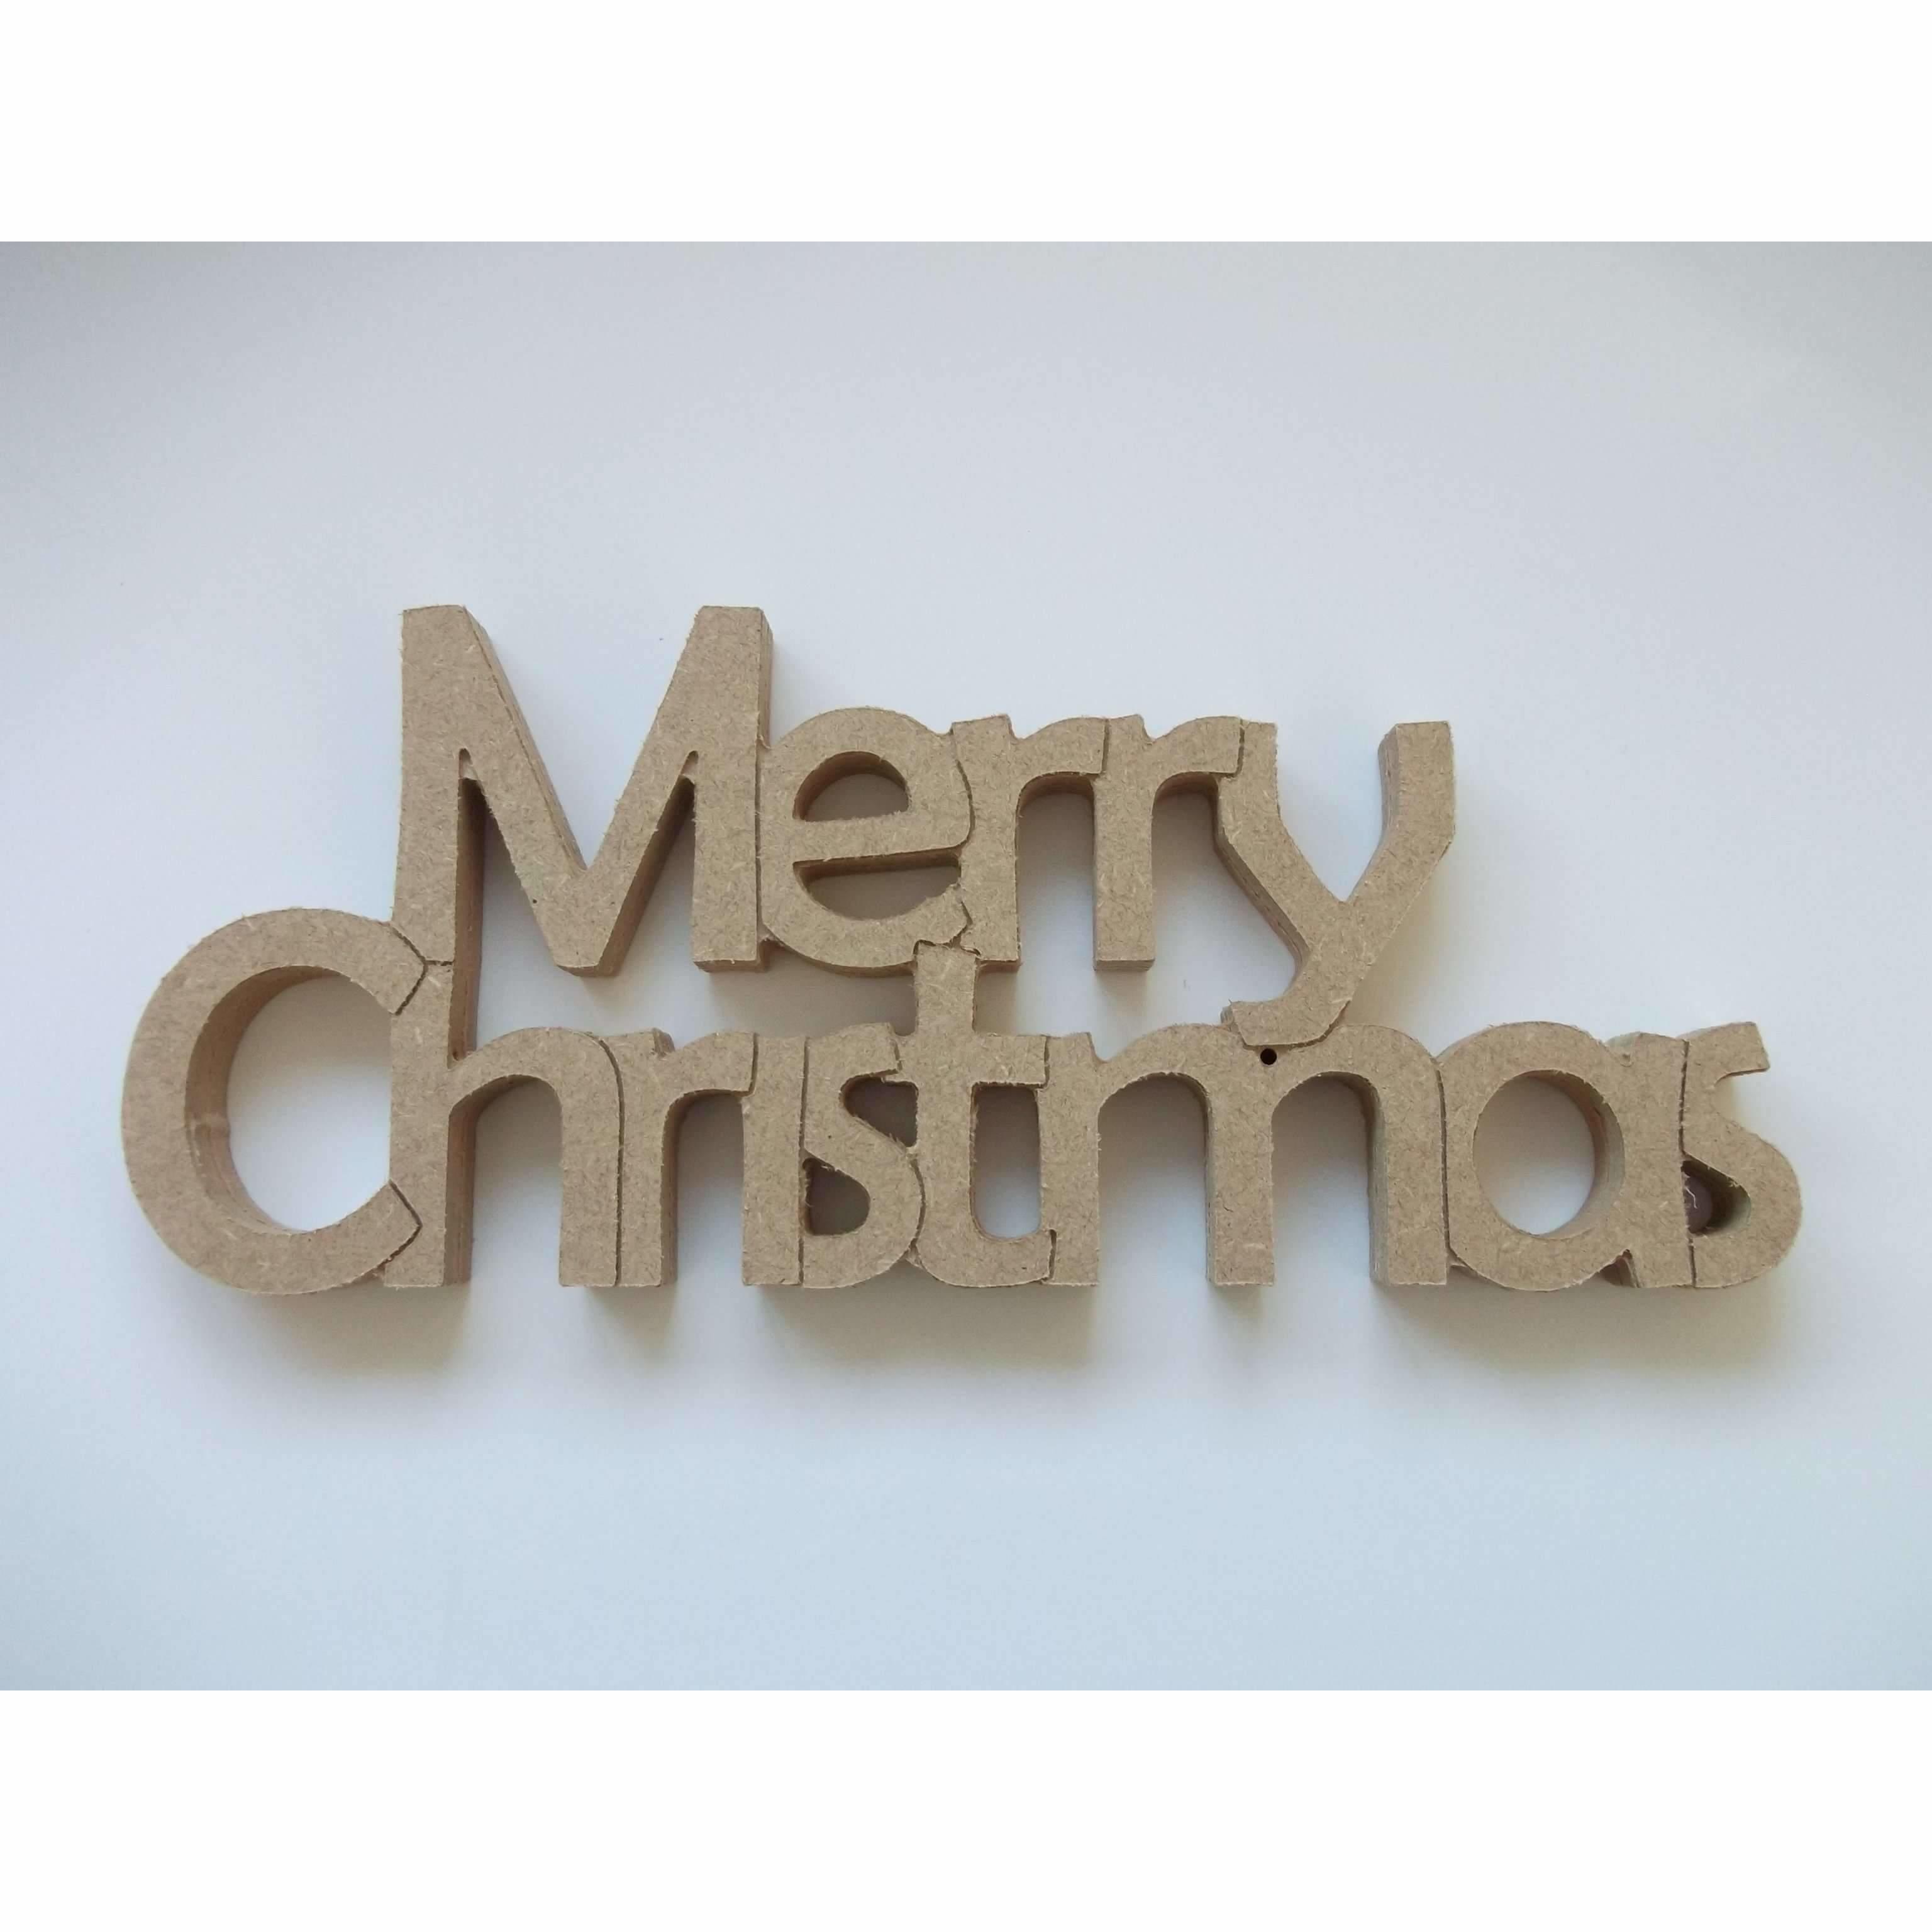 Red Berry Crafts Ltd:Merry Christmas Freestanding Phrase